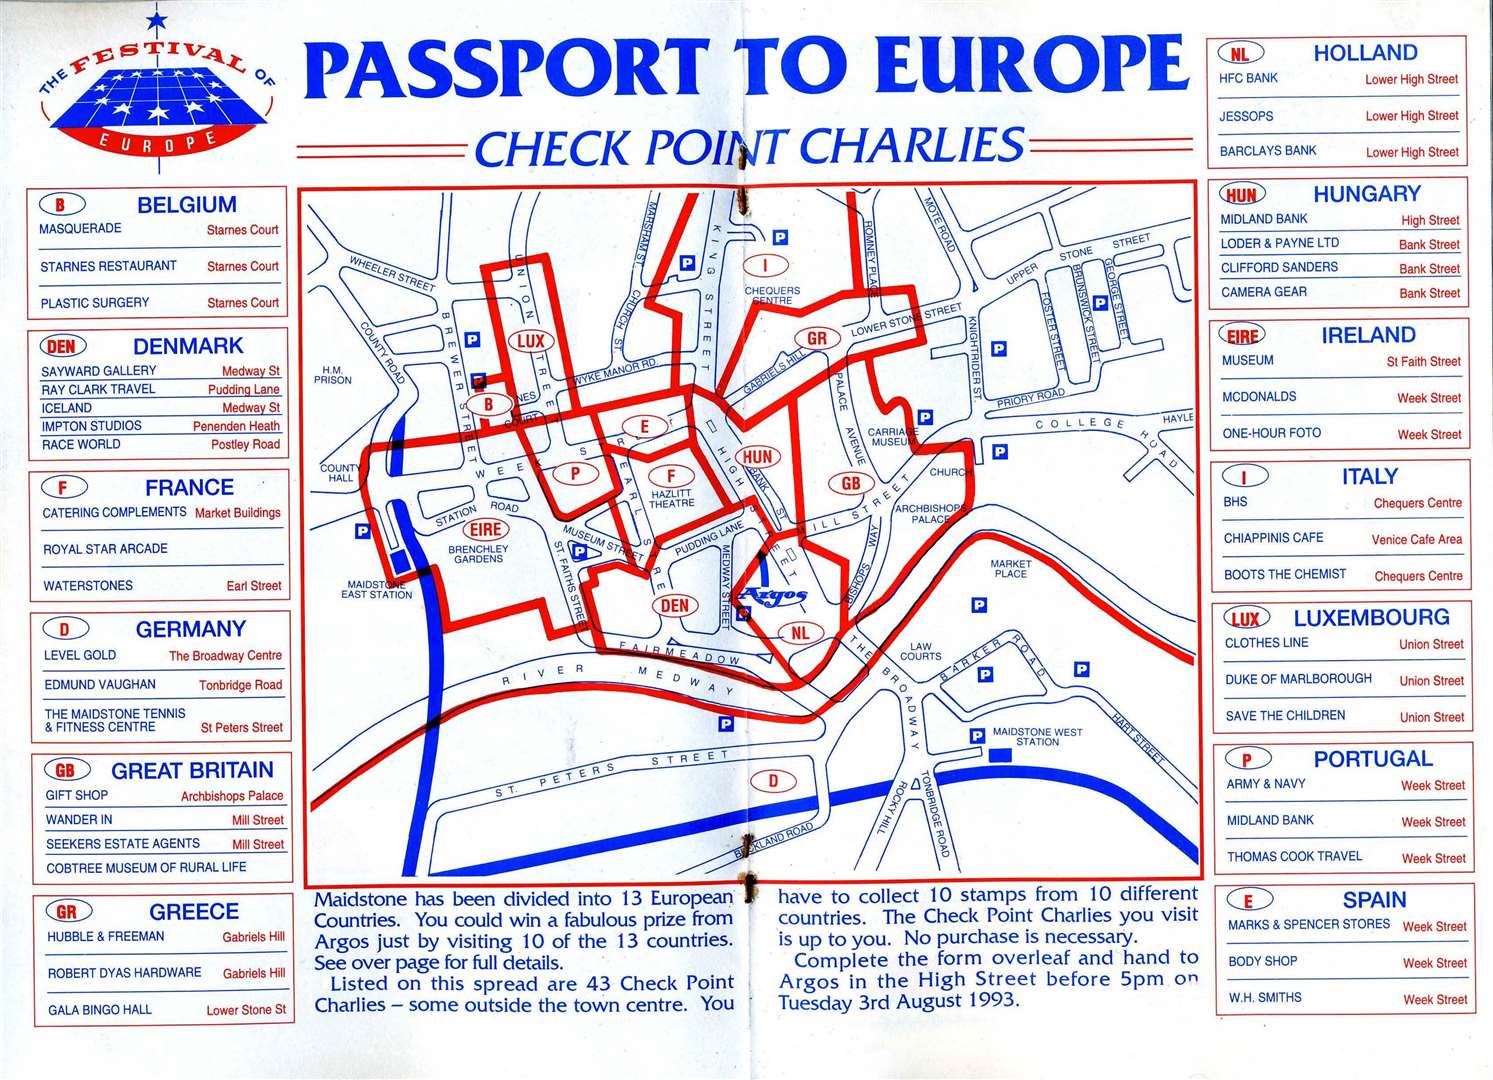 Maidstone's Passport to Europe for the 1993 festival